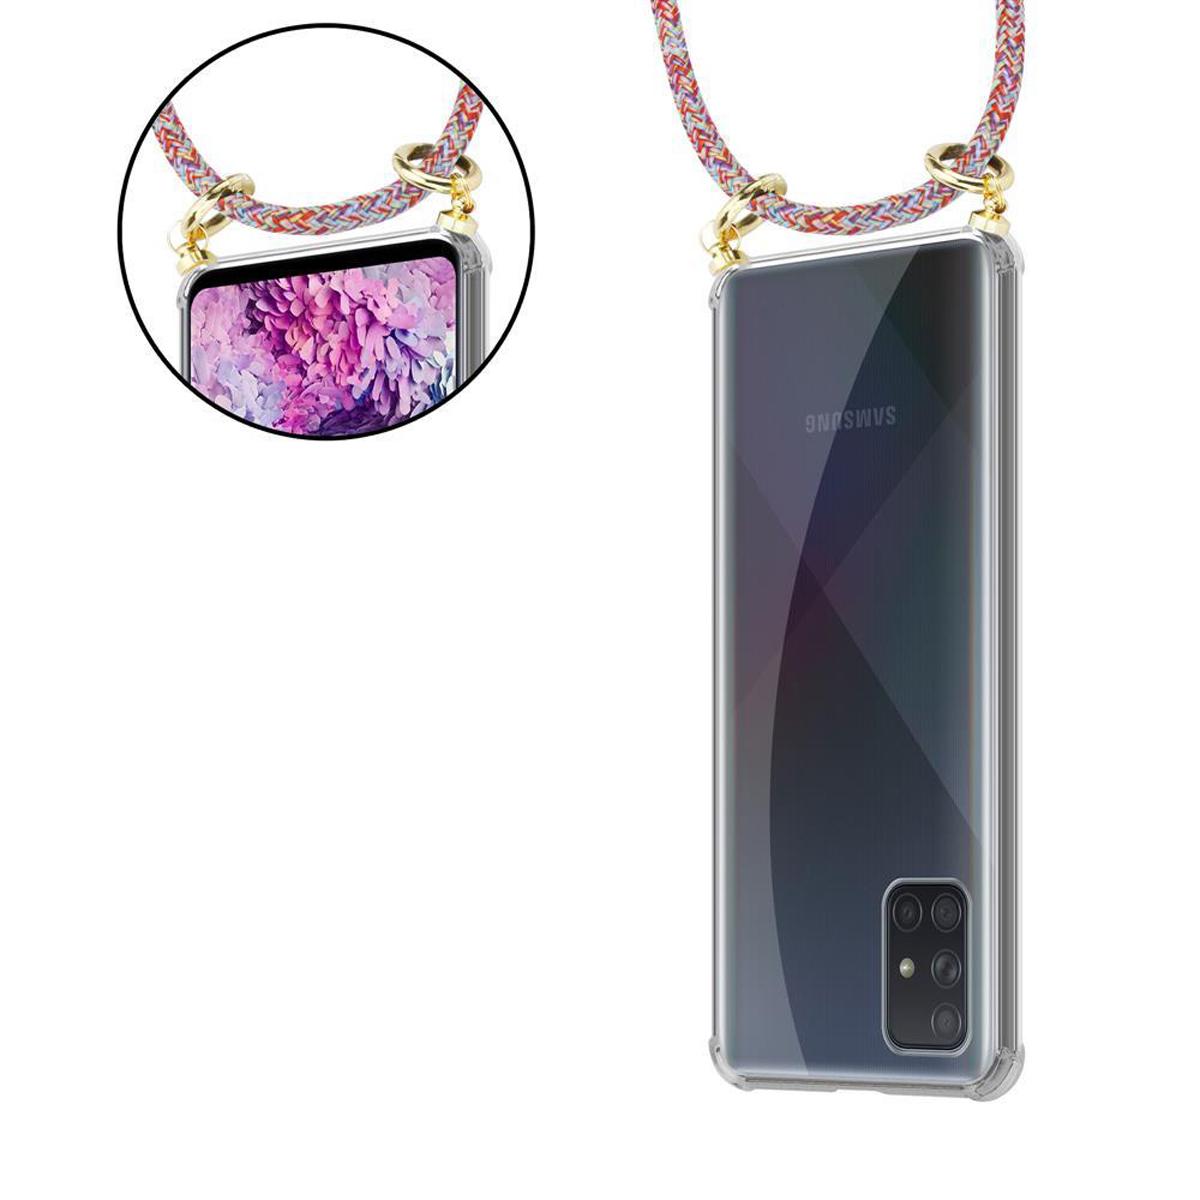 CADORABO Handy abnehmbarer Gold Band Backcover, Galaxy A71 Ringen, mit 4G, Hülle, PARROT Kordel COLORFUL und Kette Samsung